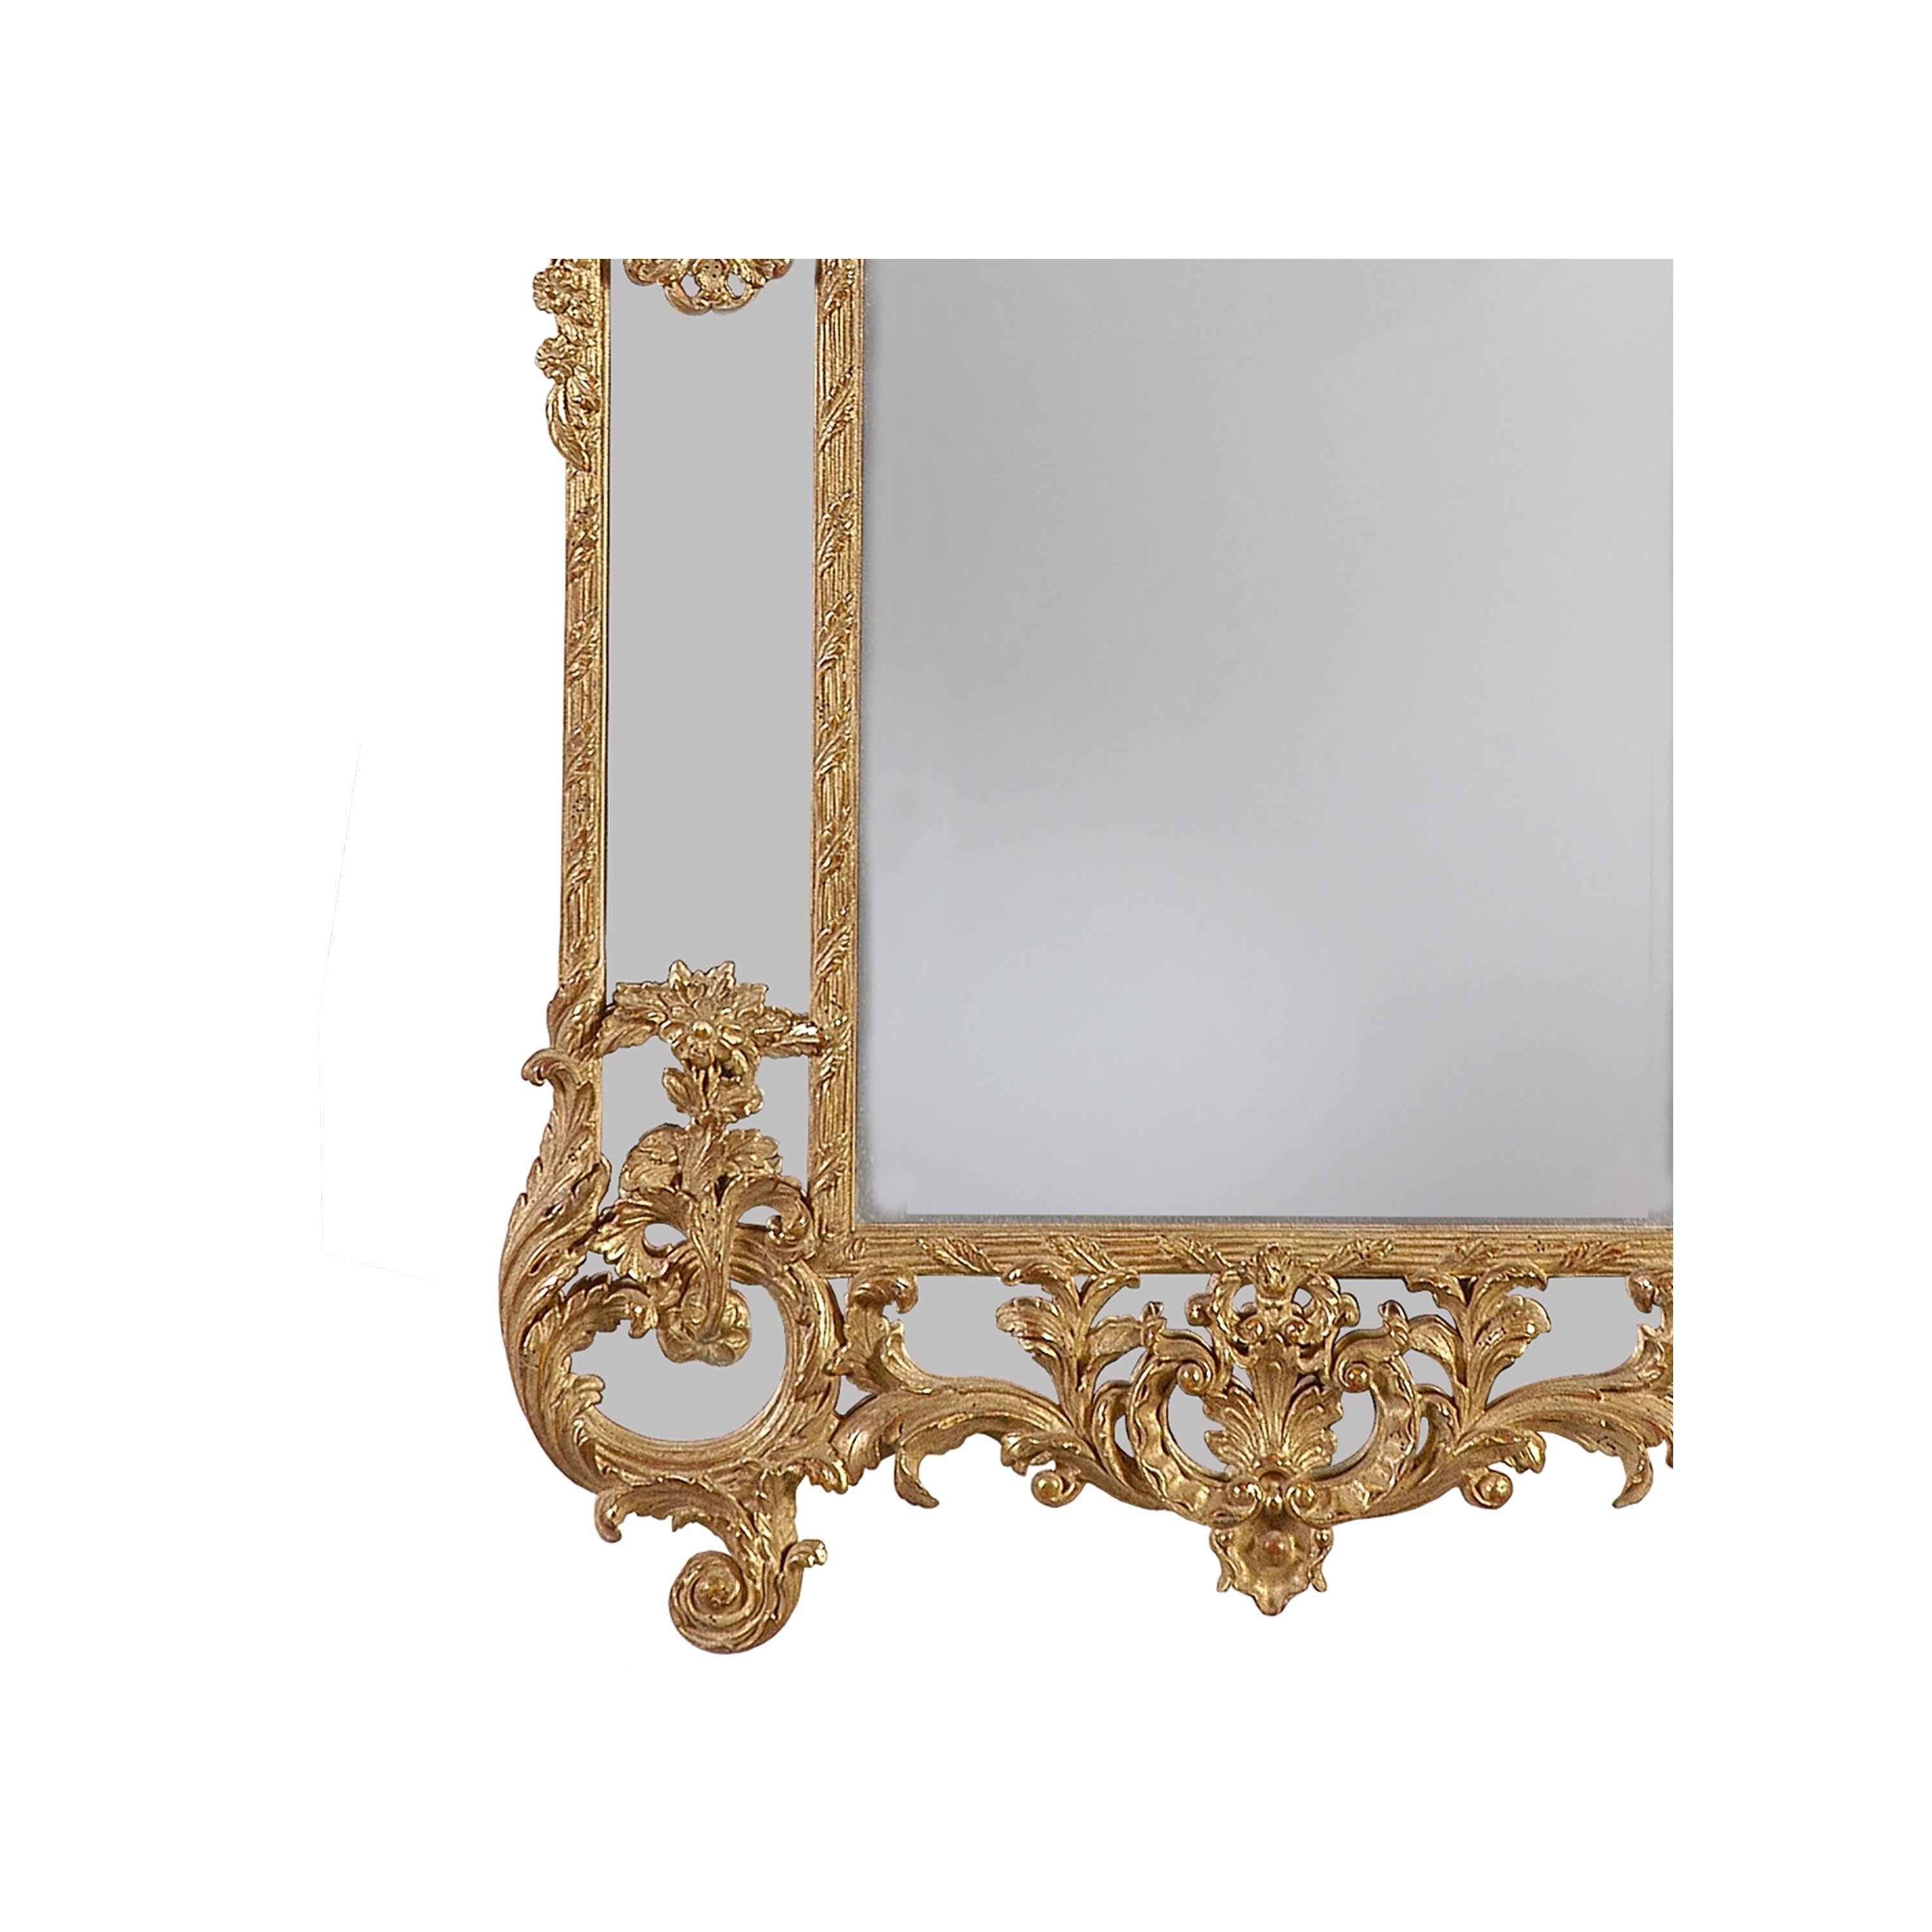 Neoclassical Revival Neoclassical Regency Style Rectangular Gold Foil Hand Carved Wooden Mirror, 1970 For Sale